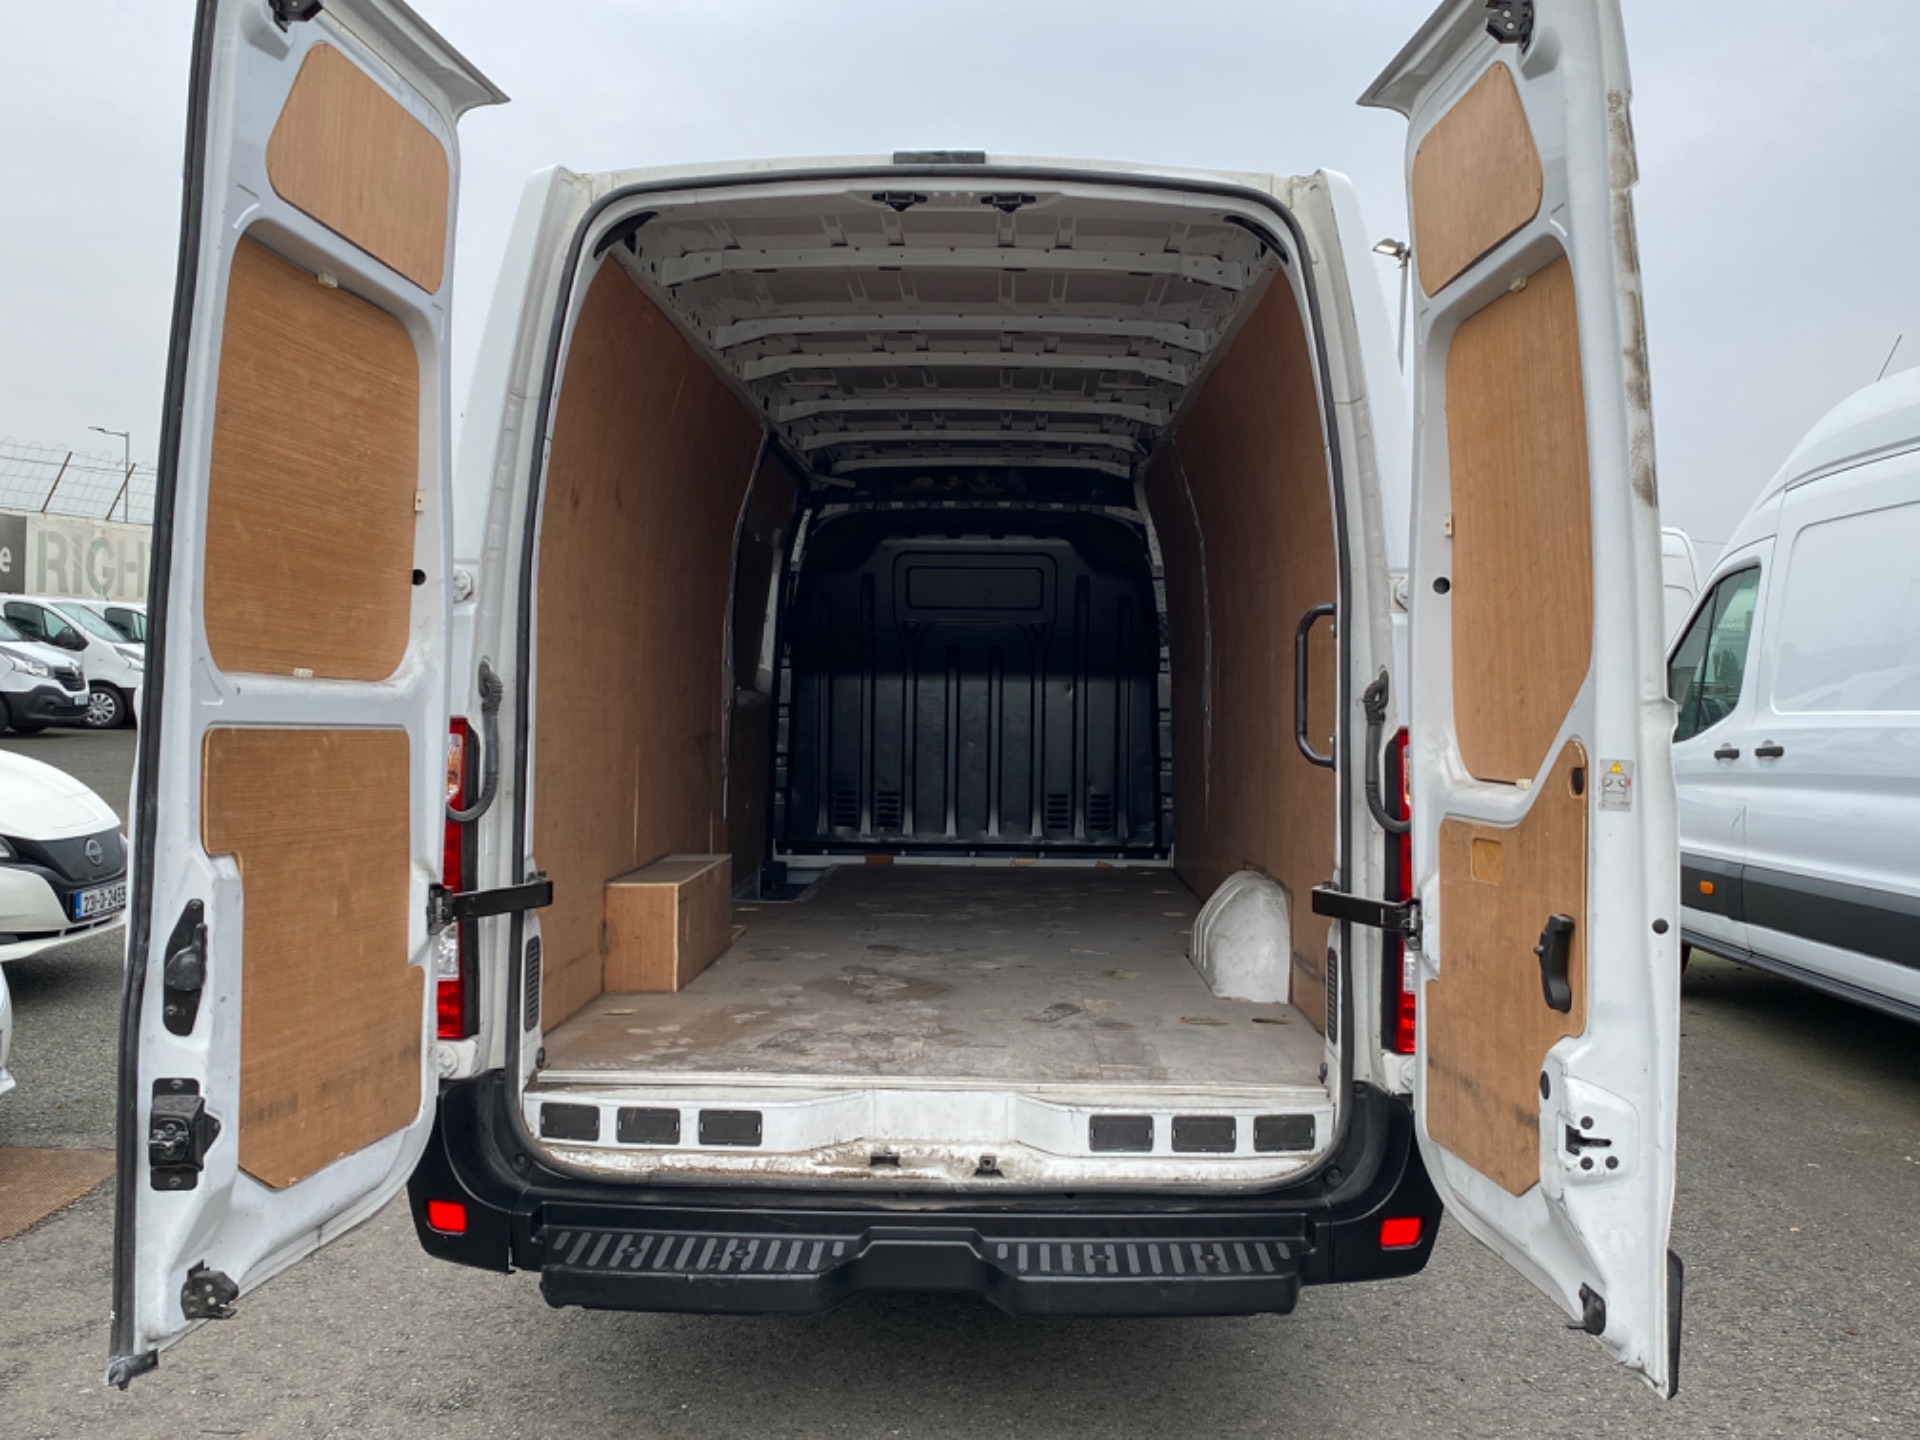 2020 Renault Master RWD LML35 DCI 130 Business MY1 (201D9384) Thumbnail 14